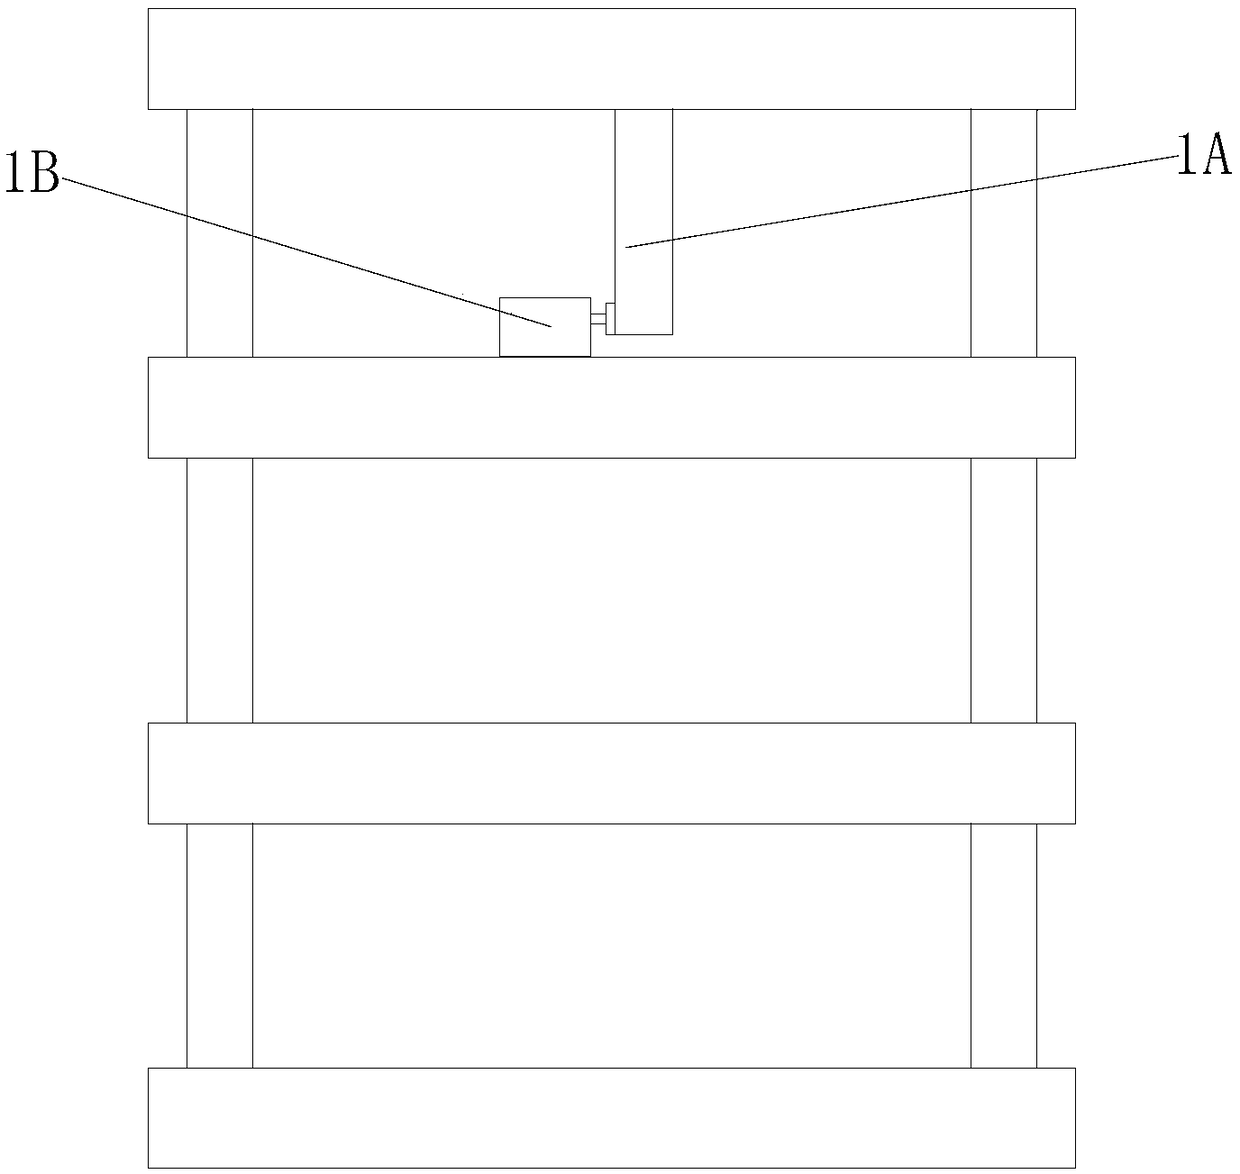 A nonlinear structural damage identification method based on ARCH model